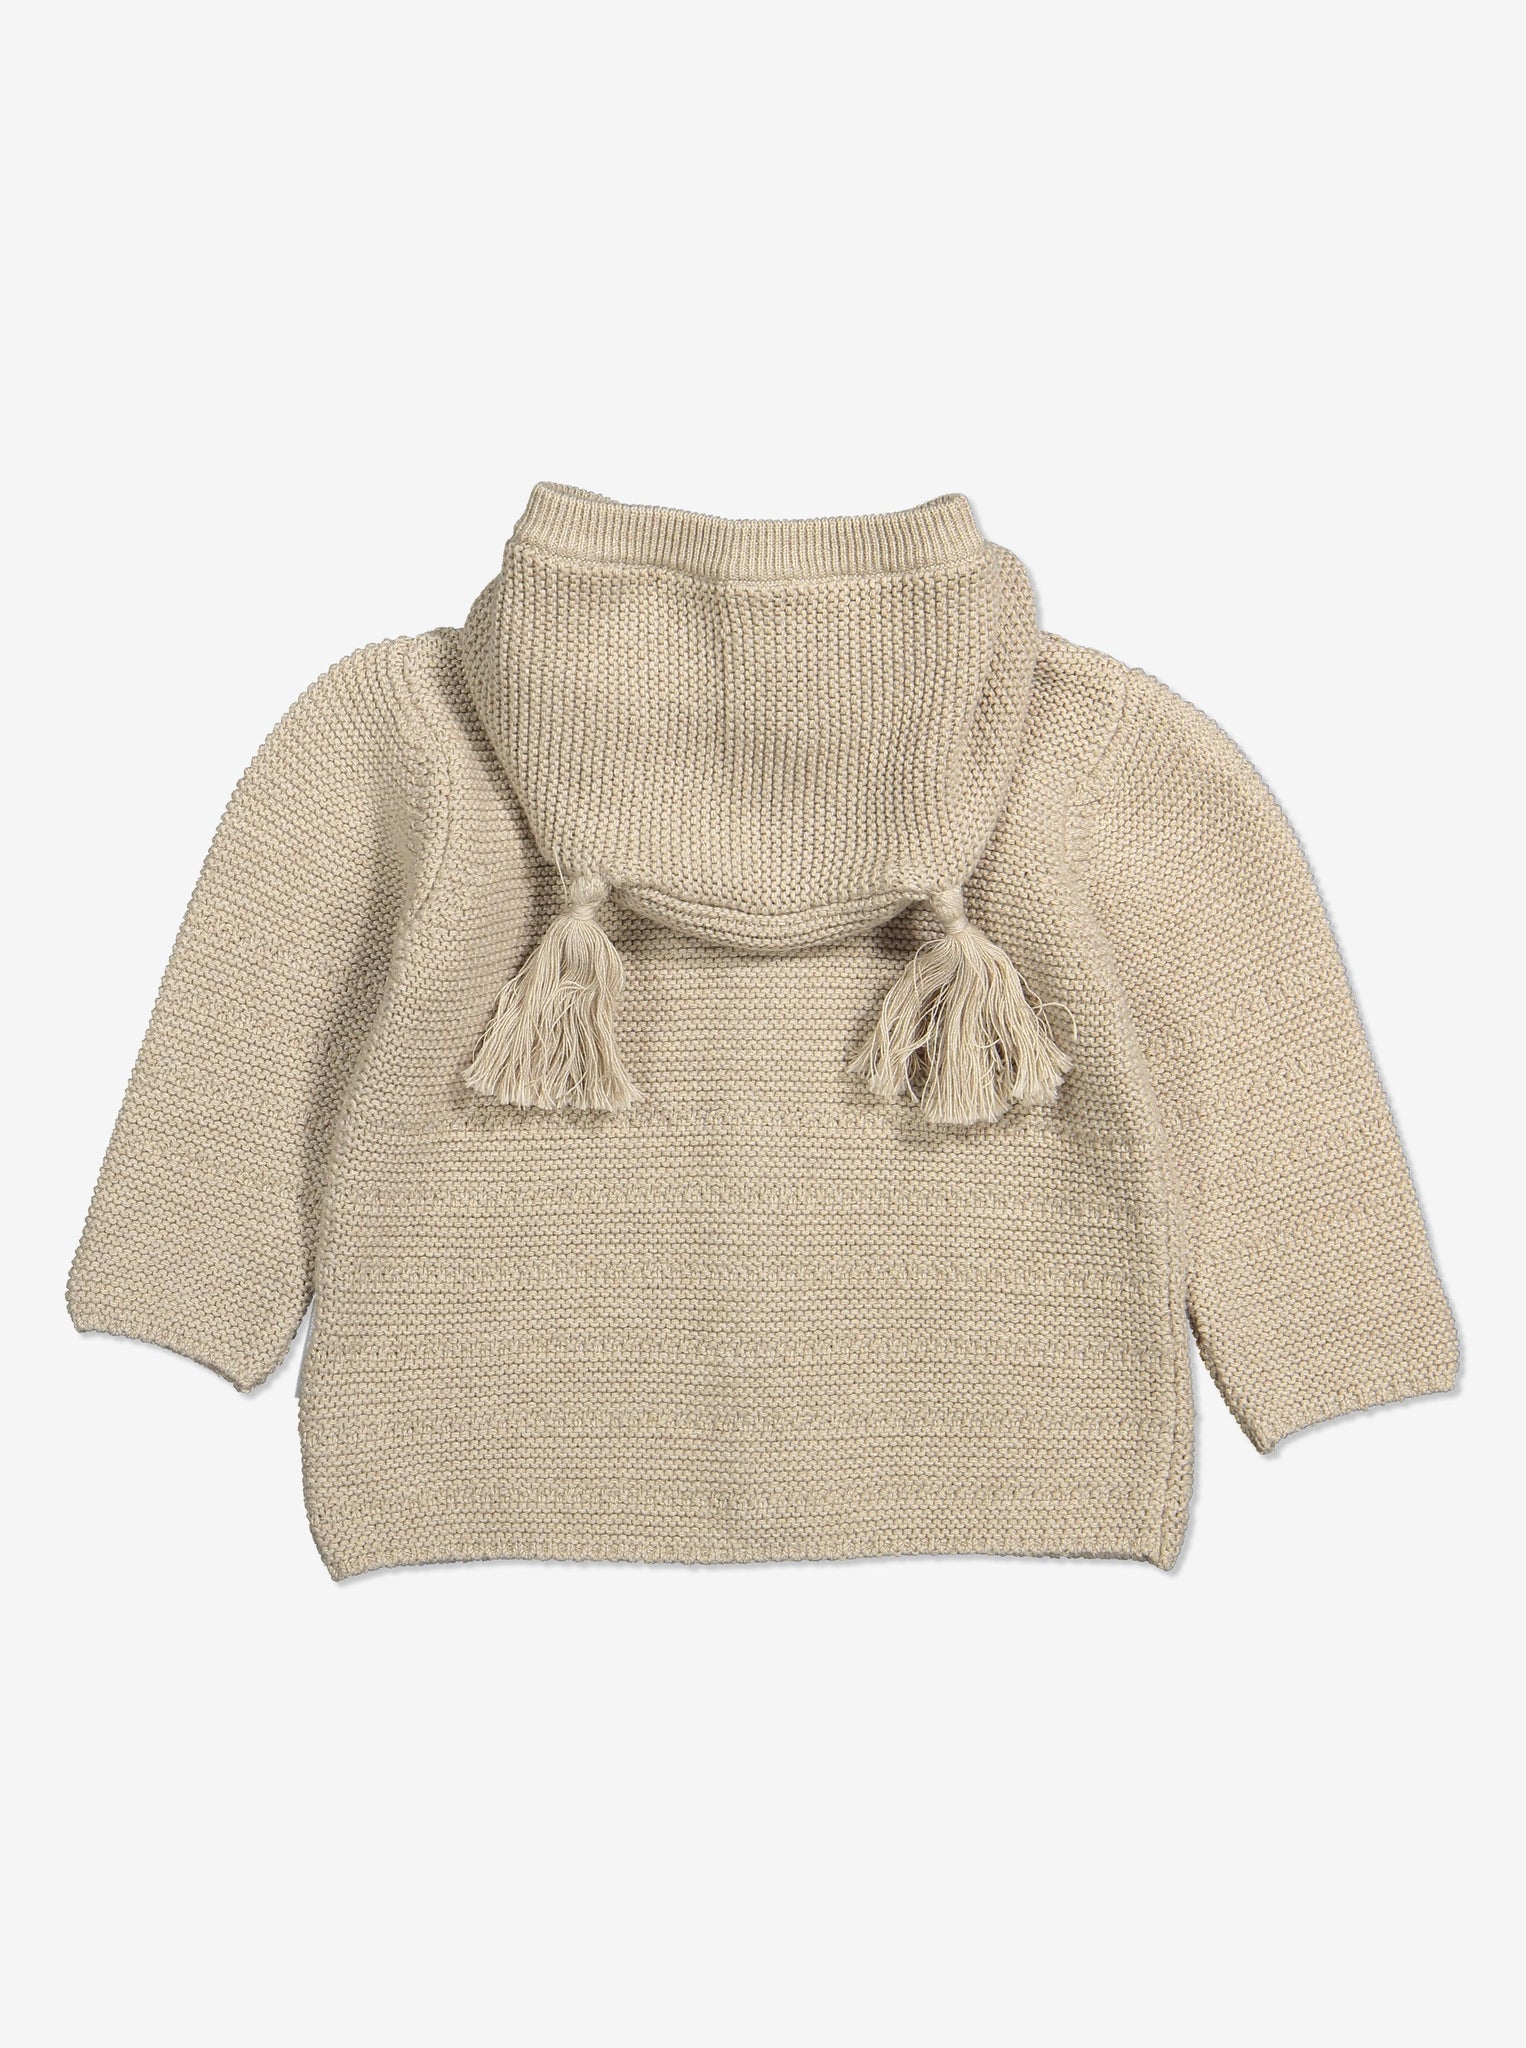 Knitted Baby Hoodie-Unisex-0-1y-White